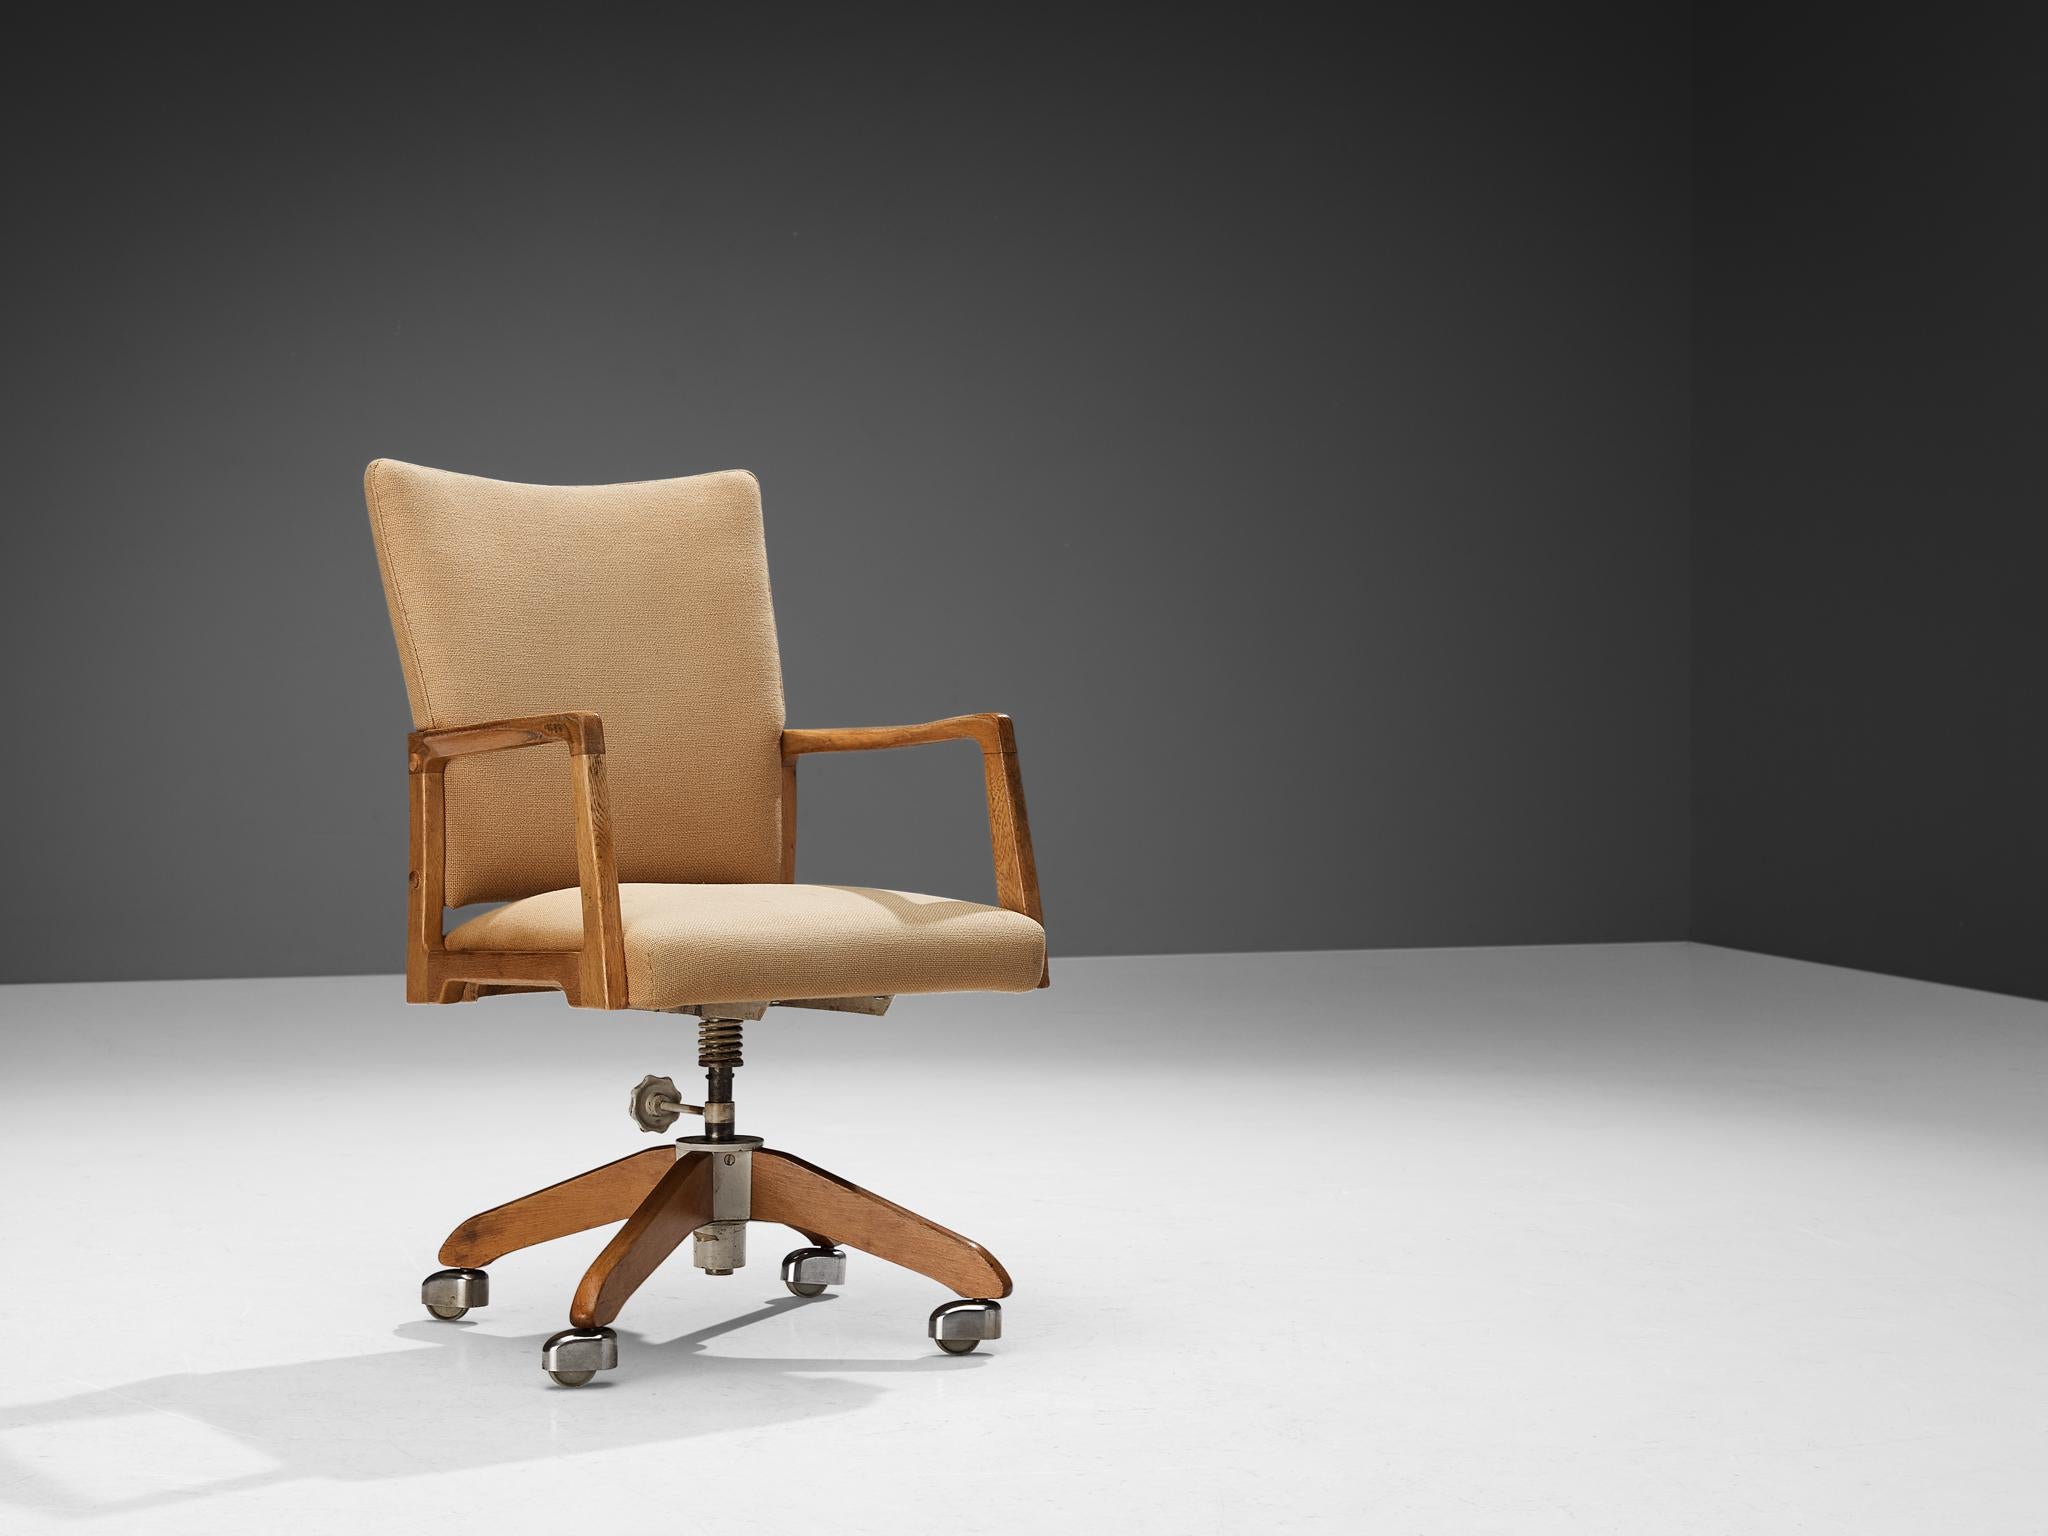 Swivel desk chair, beech, oak, chromed metal, plastic, wool, Europe, 1960s

Nicely sculpted office chair based on an interesting composition of geometrical shapes. The armrests feature an open frame based on a cubic form and executed in oak. The